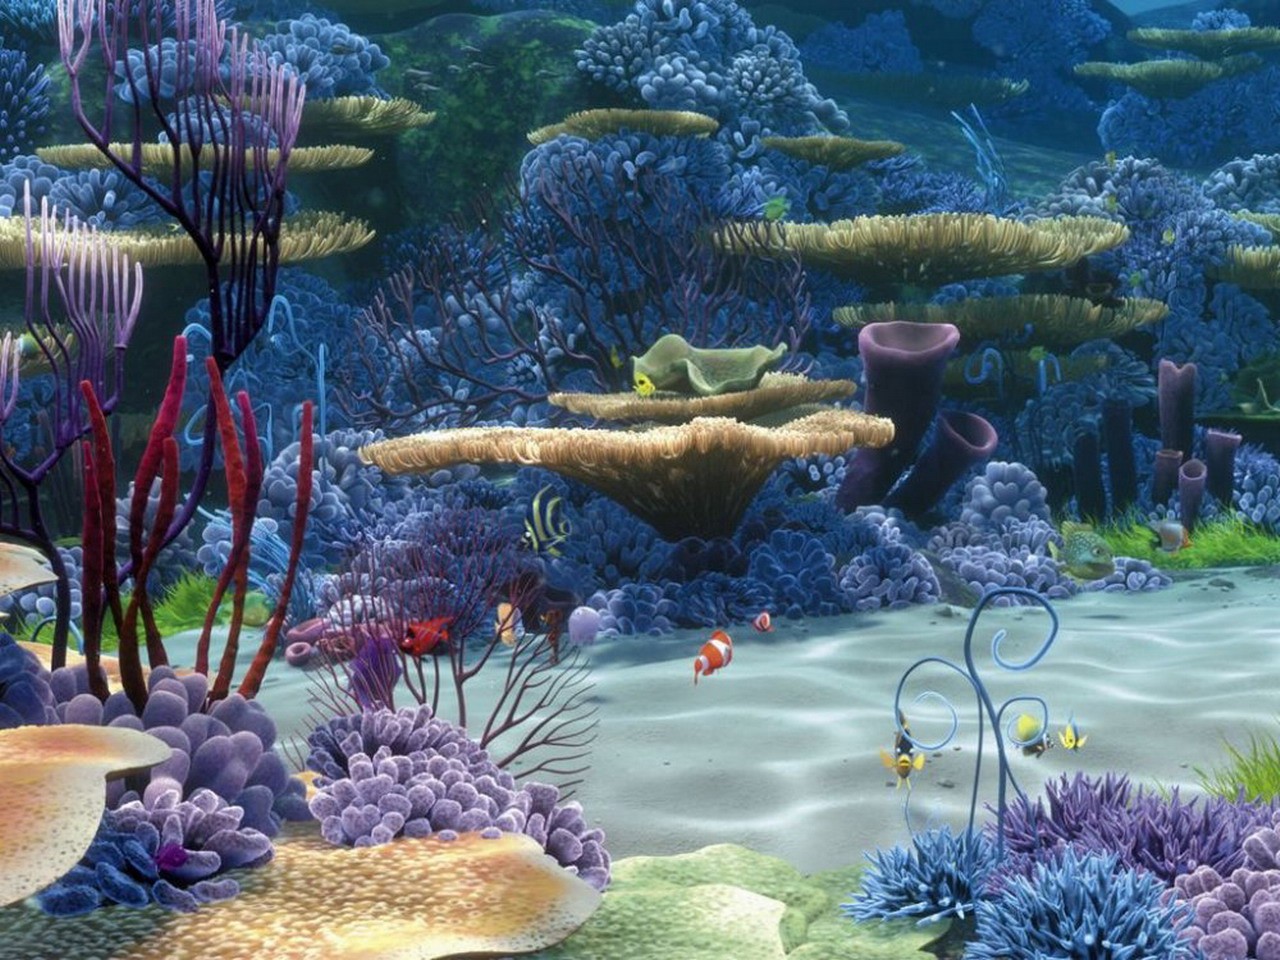 ... under water world lets go to see some beautiful wallpaper of under